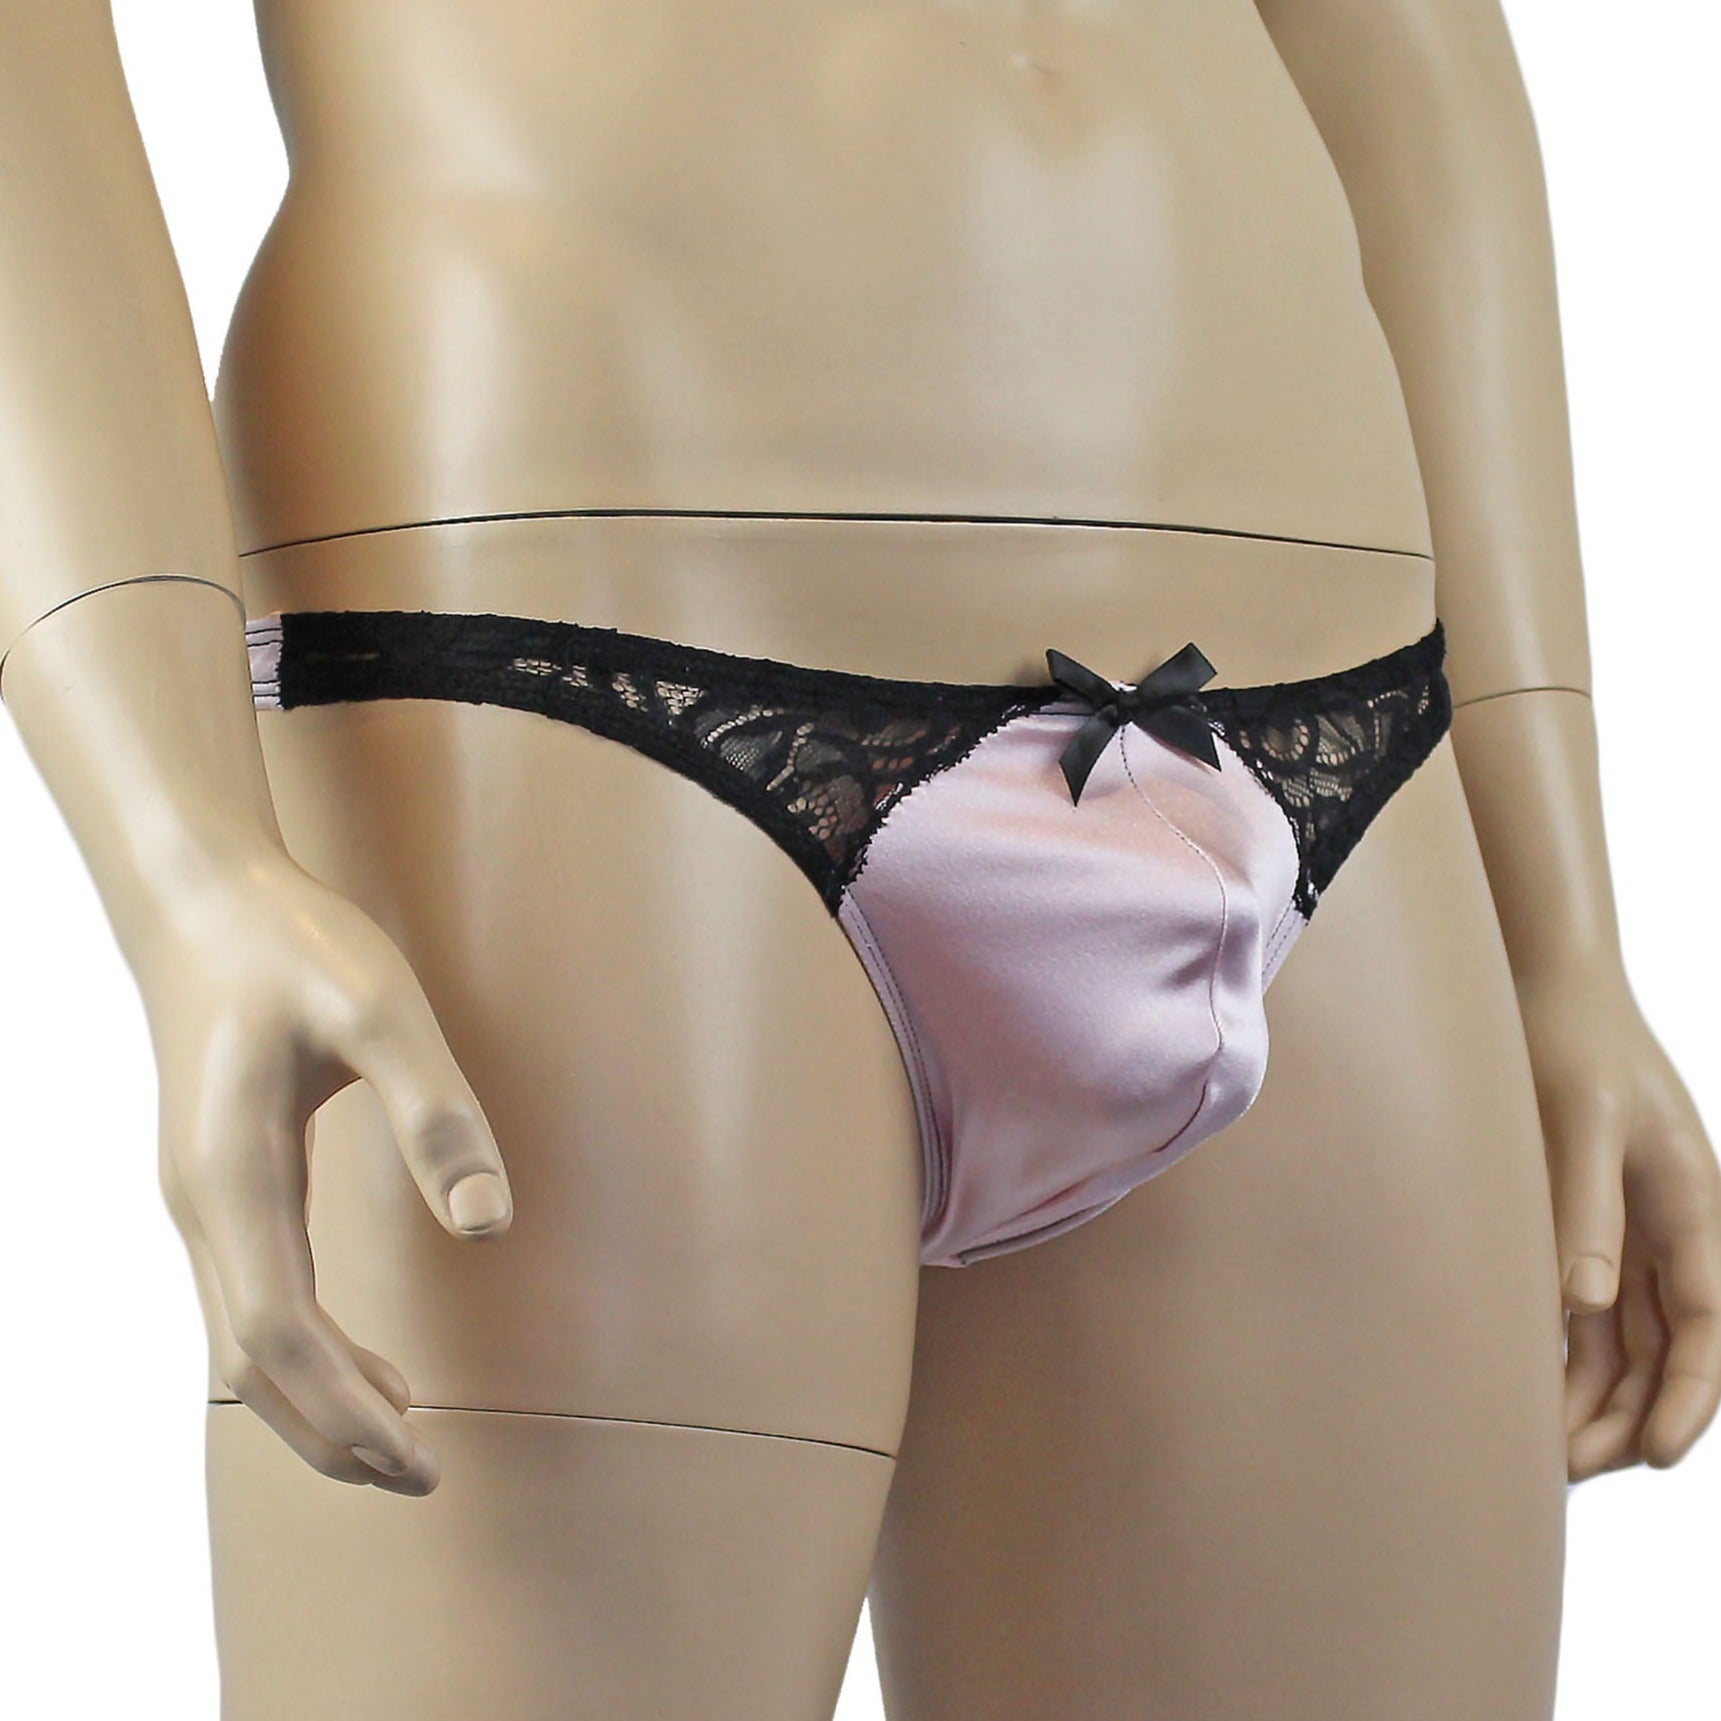 Mens Risque G string Thong Light Pink and Black Lace